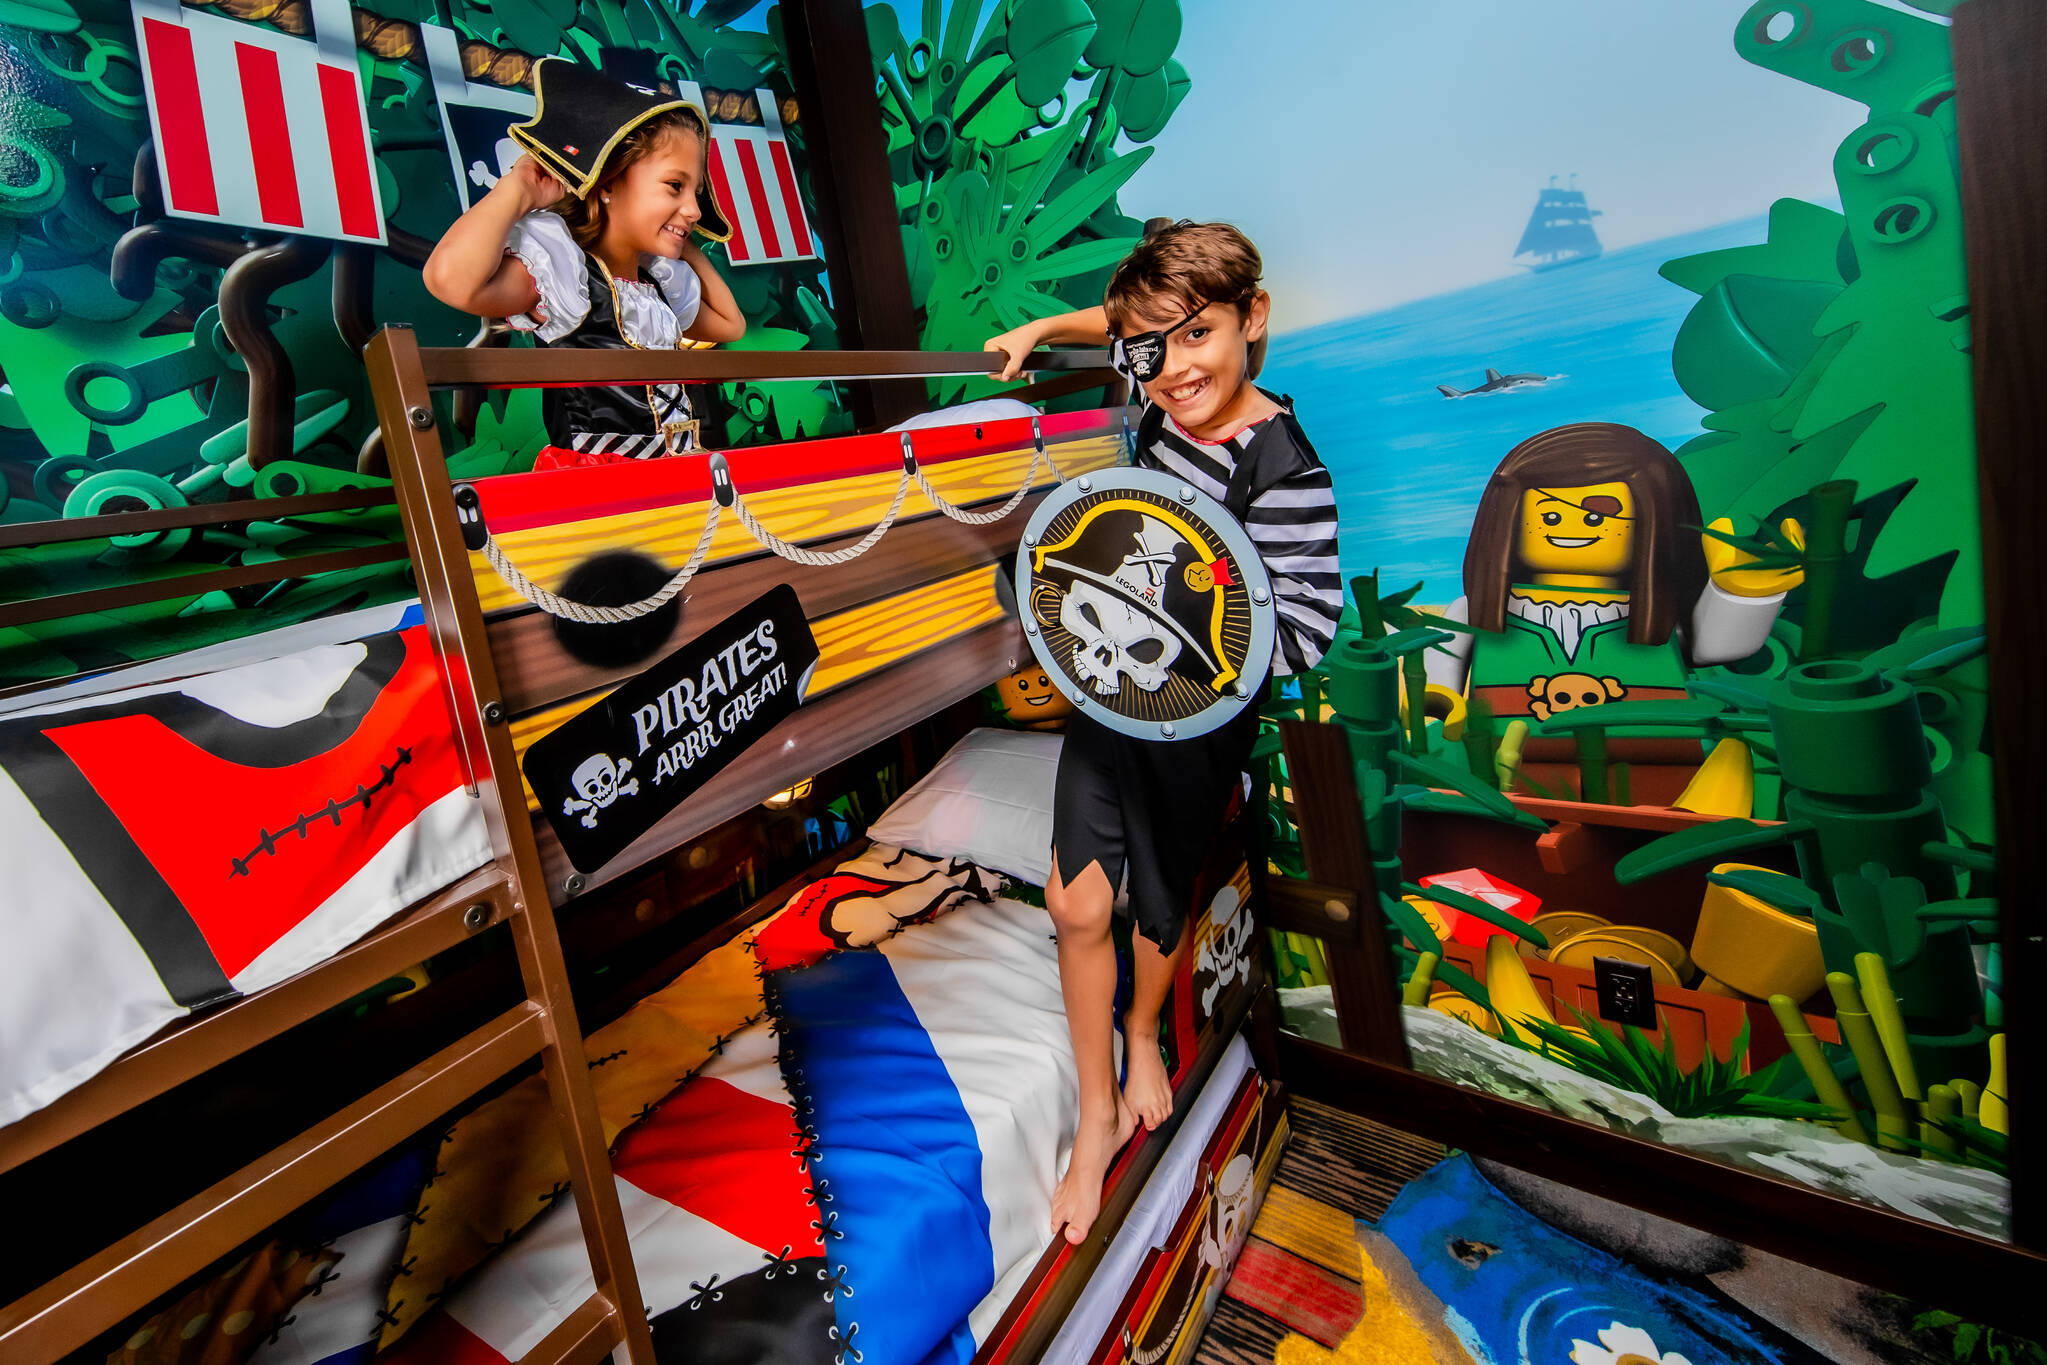 Kids Play on Their Bunk Bed at the Pirate Island Hotel